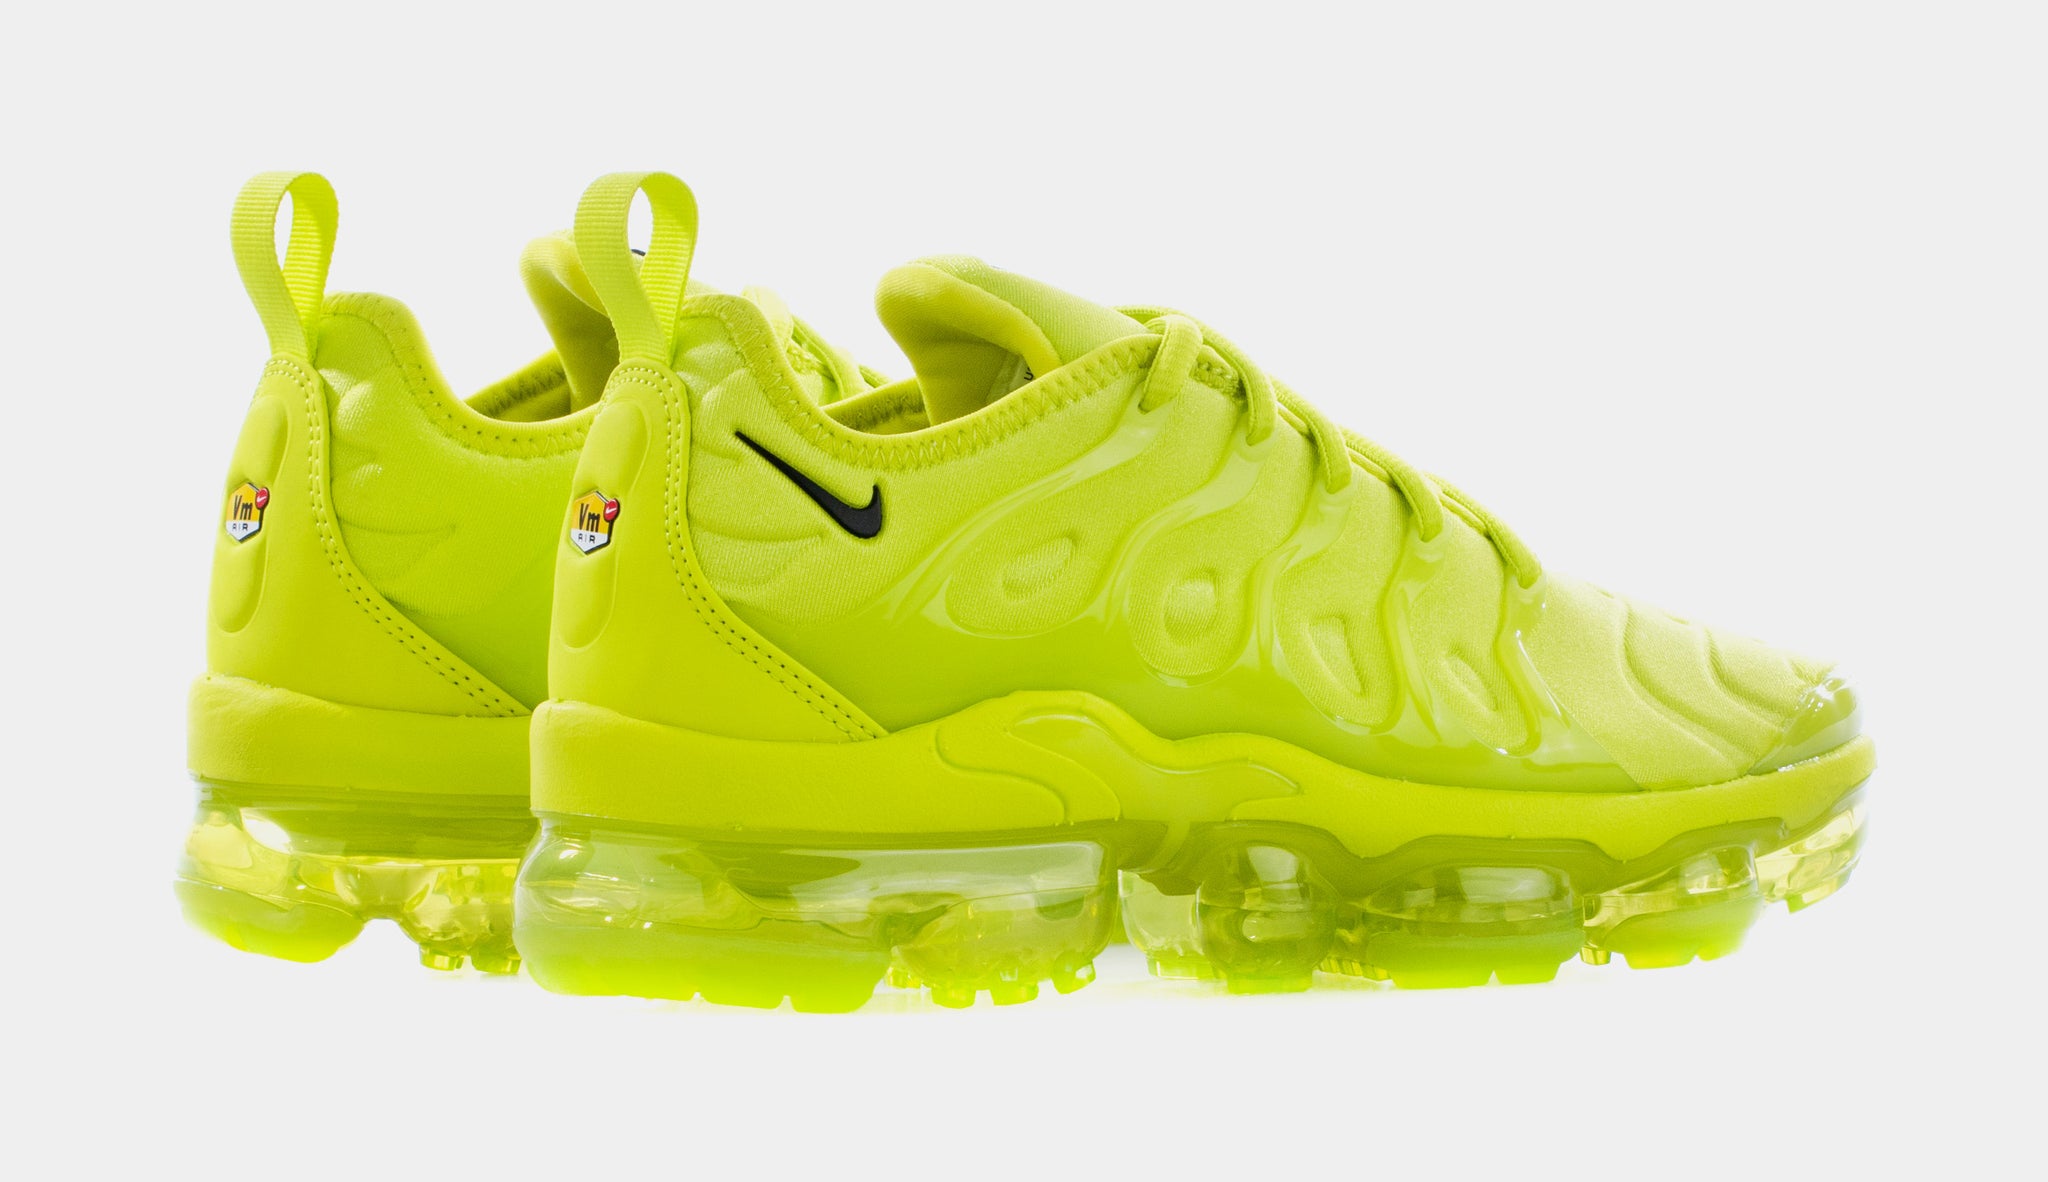 Nike Air VaporMax Plus Tennis Ball for Sale, Authenticity Guaranteed